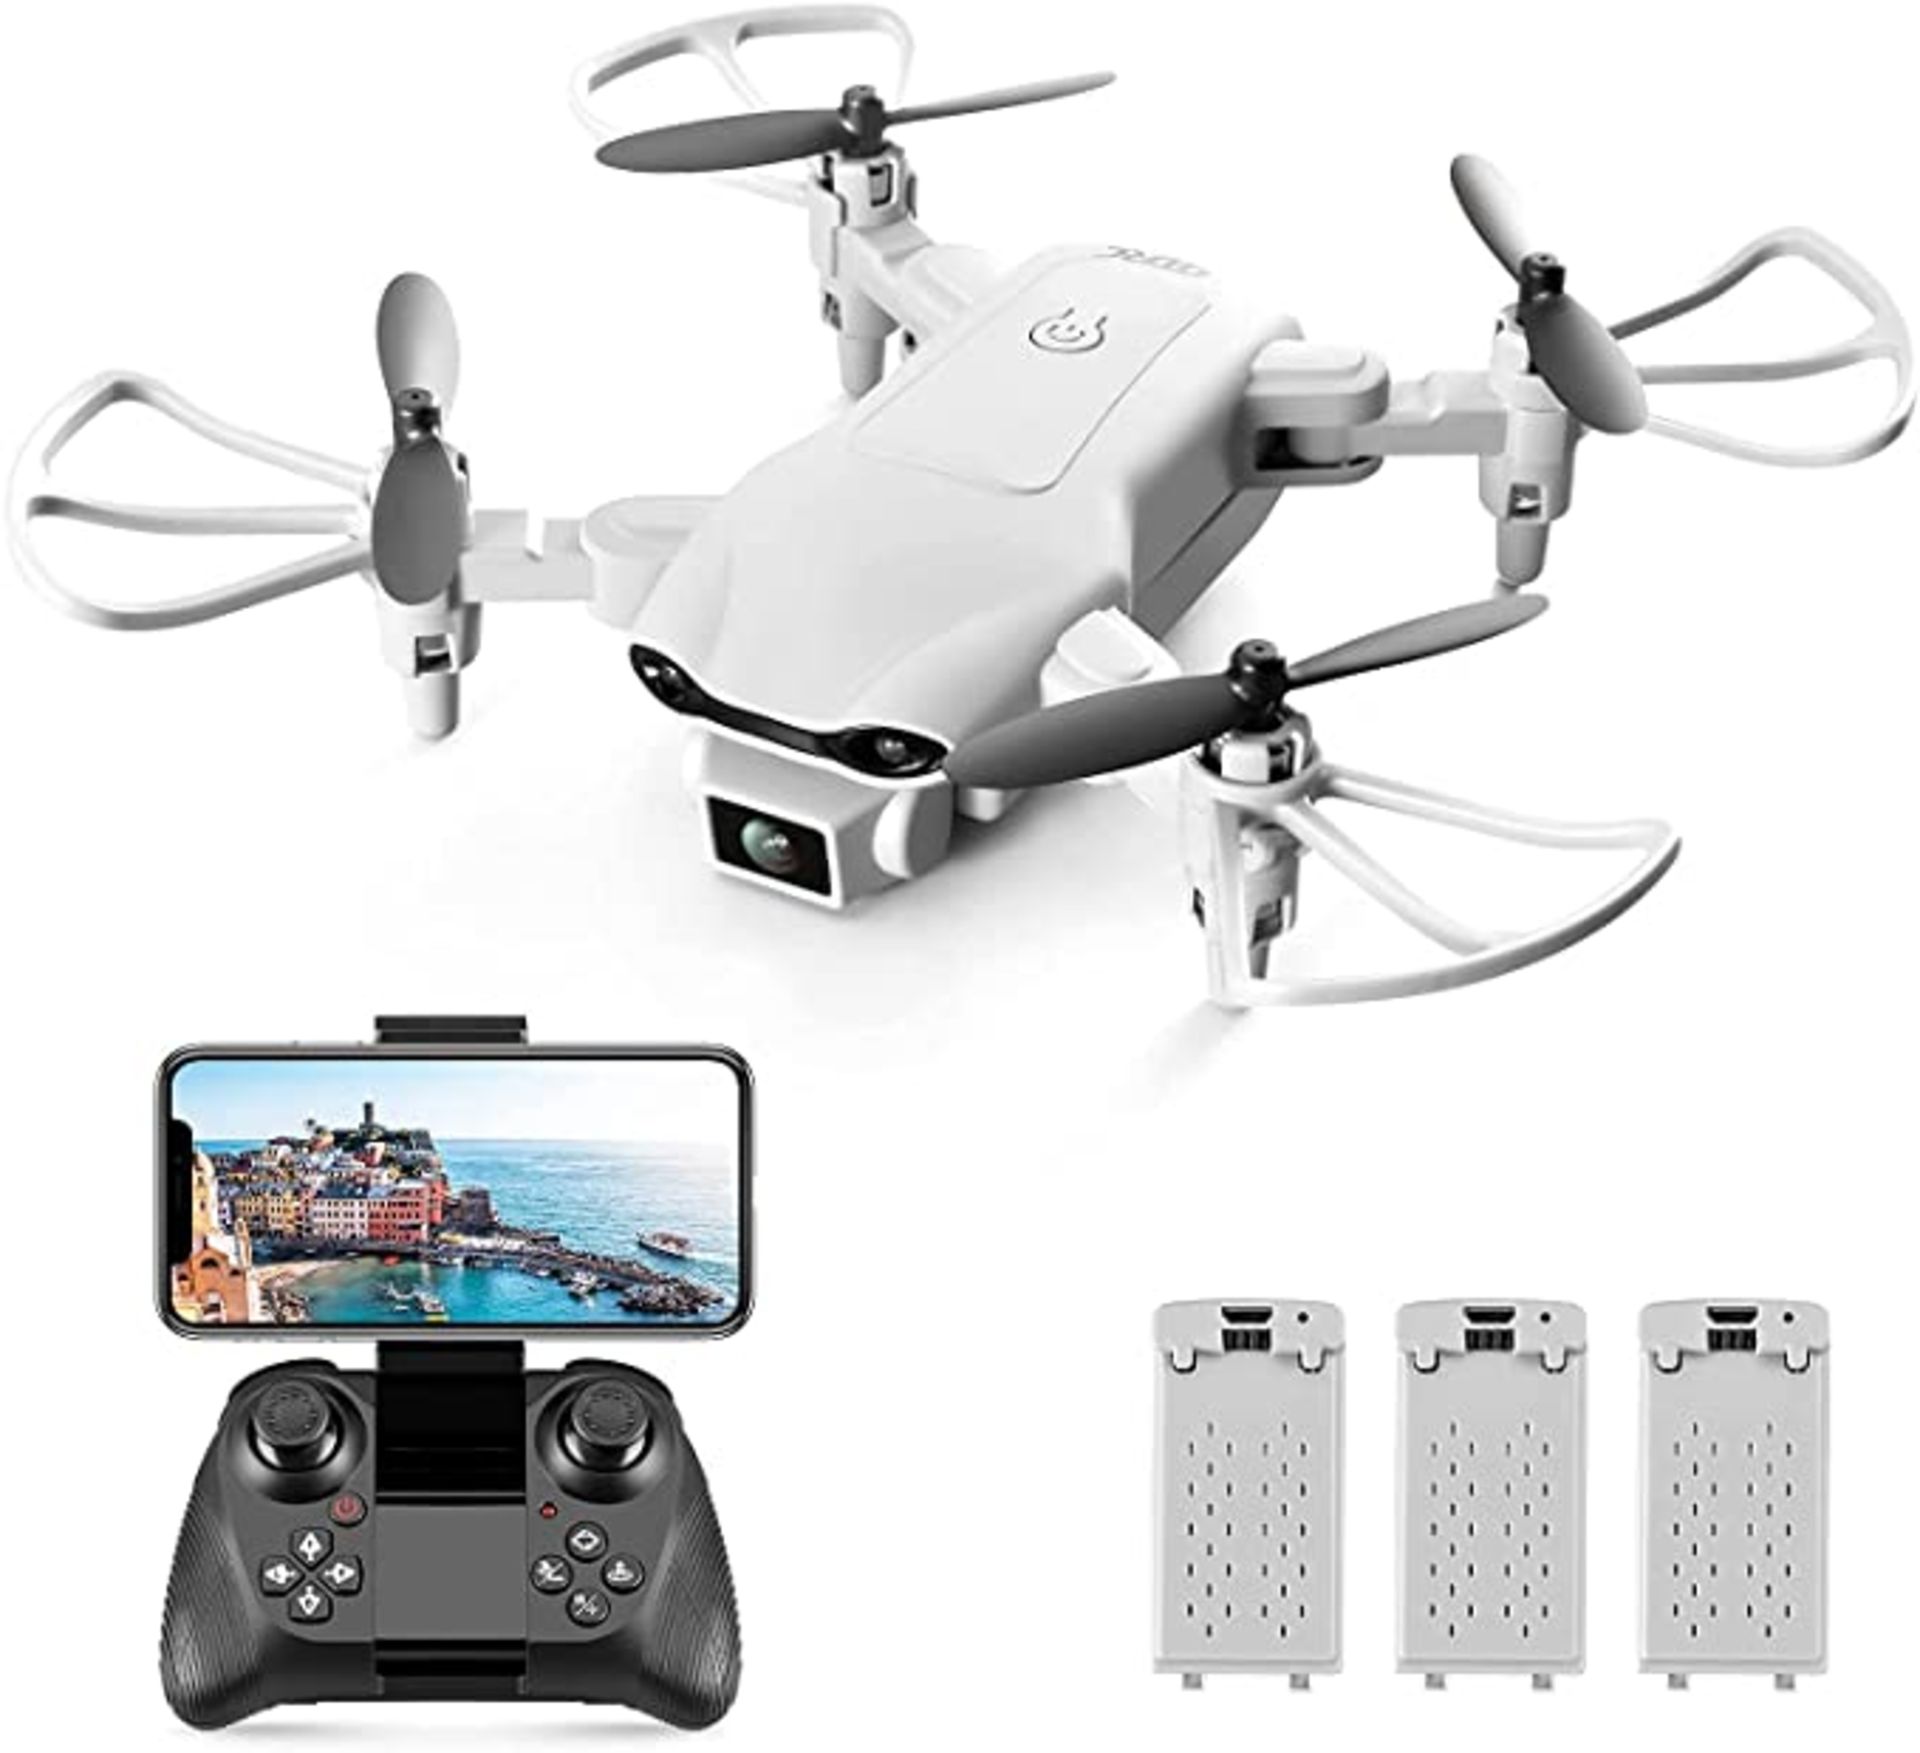 3 x 4DRC V9 Mini Drone for Kids with 720P HD FPV Camera, Foldable RC Quarcopter for Boys Girls